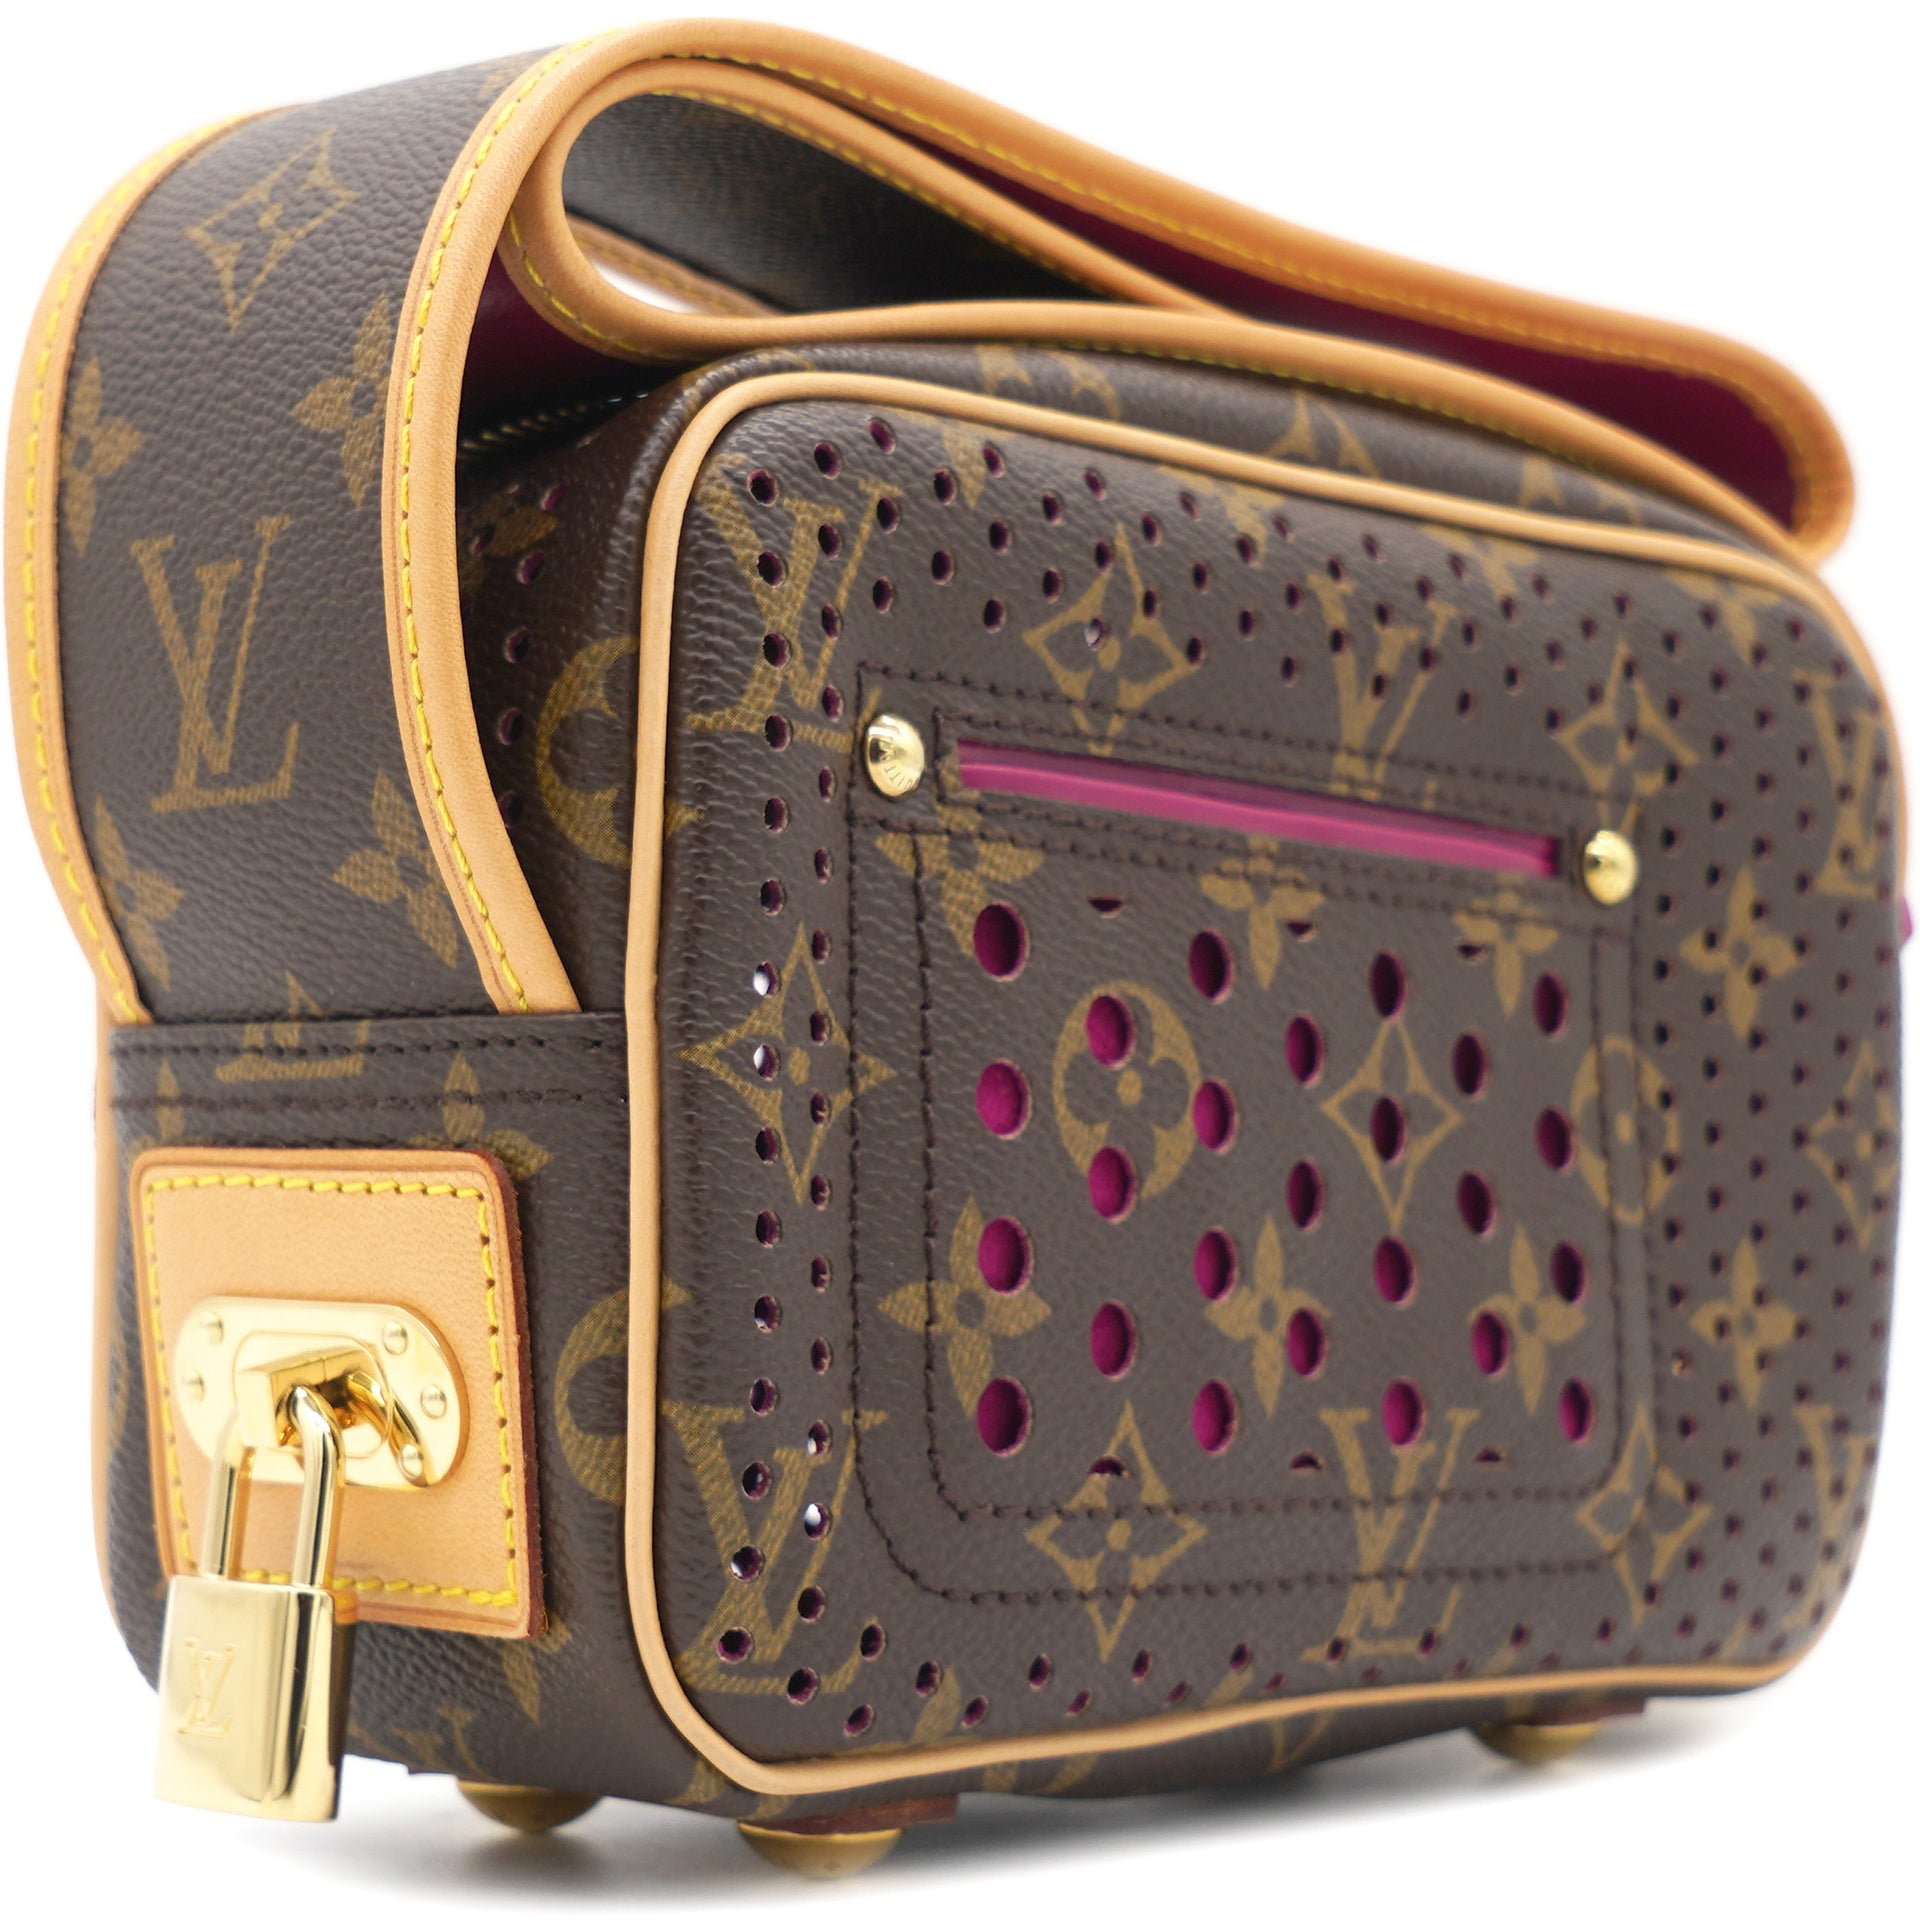 Limited edition 2006 collection Louis Vuitton monogram perforated shoulder  bag